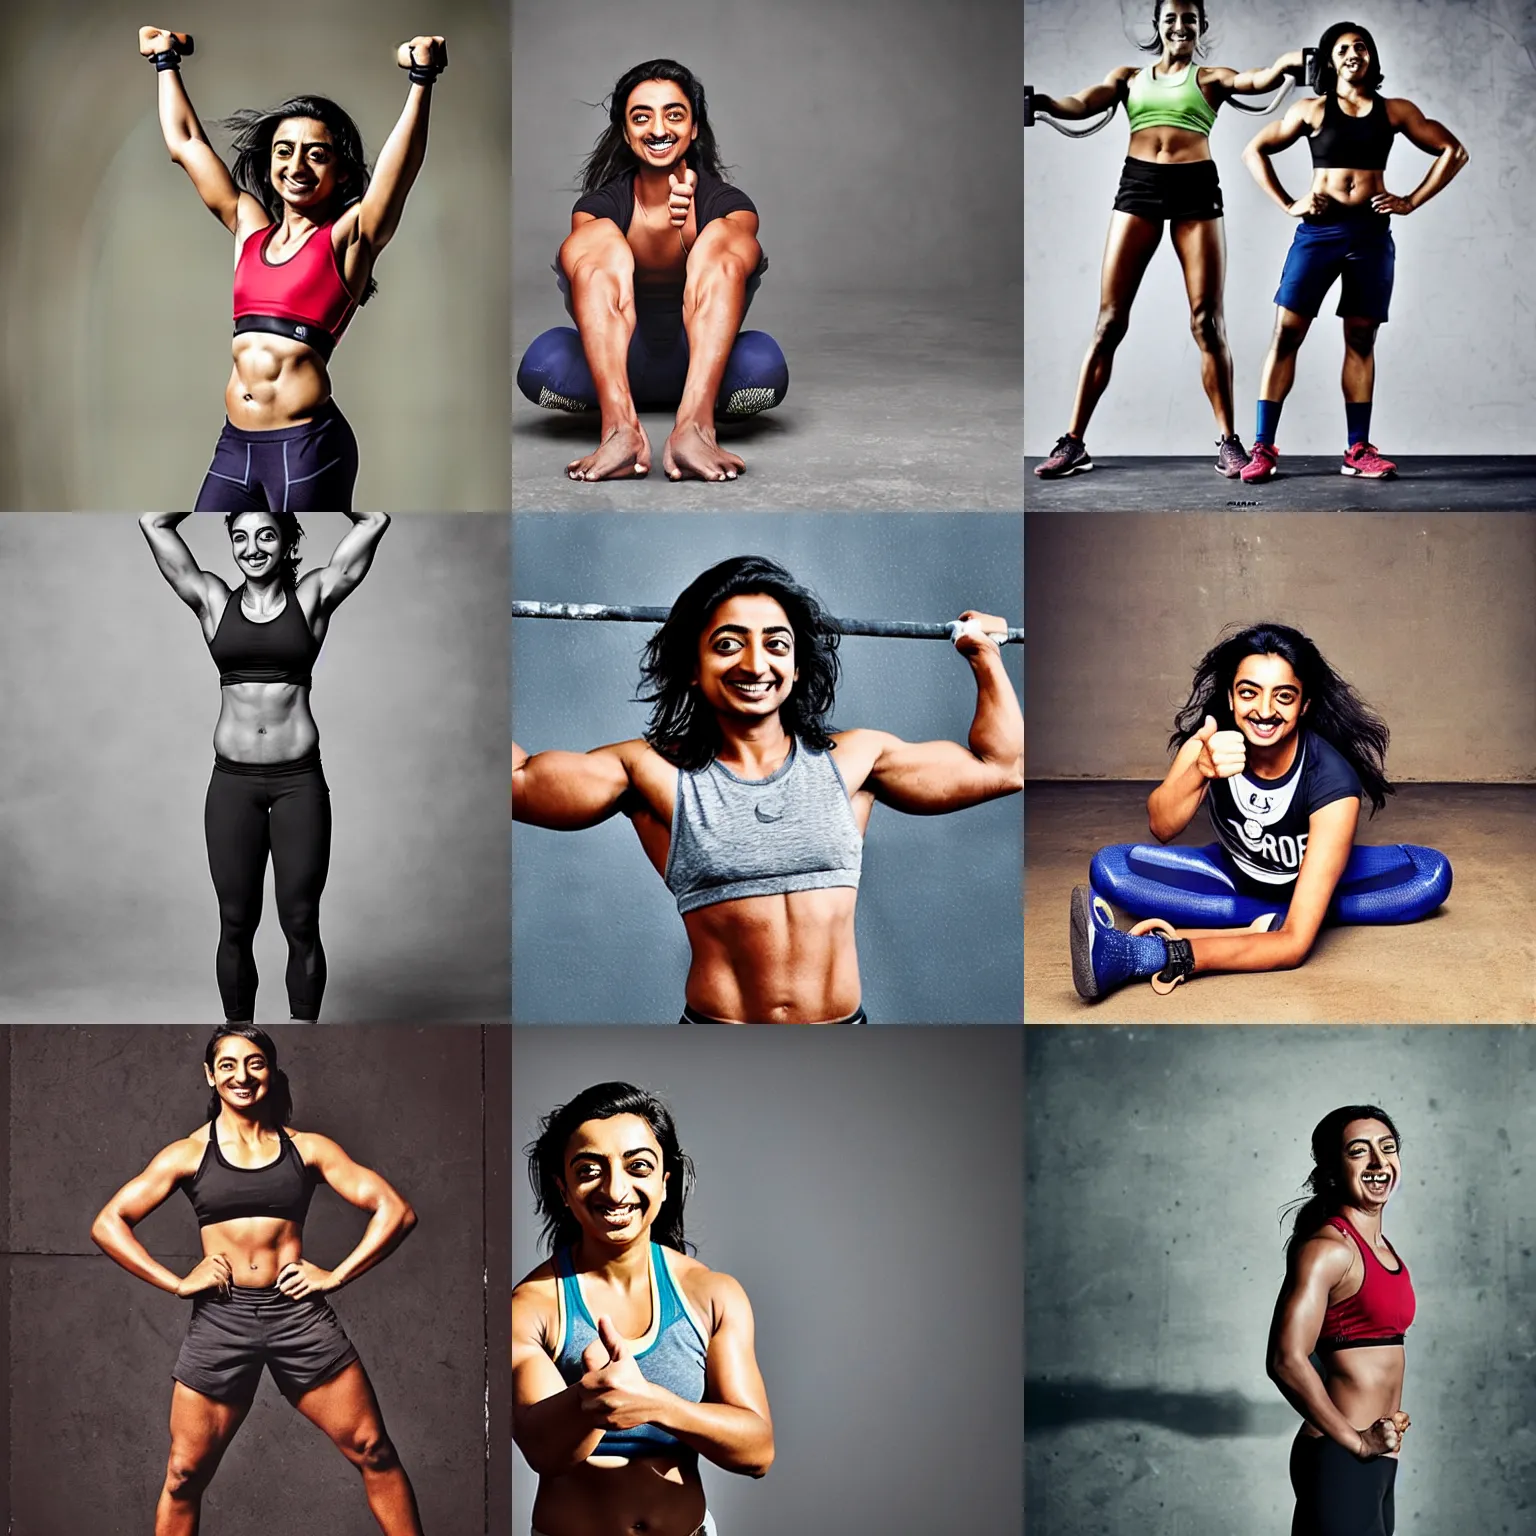 Prompt: Radhika Apte as a strong crossfit athlete, smiling, giving a thumbs up to the camera, photo portrait by Annie Leibovitz